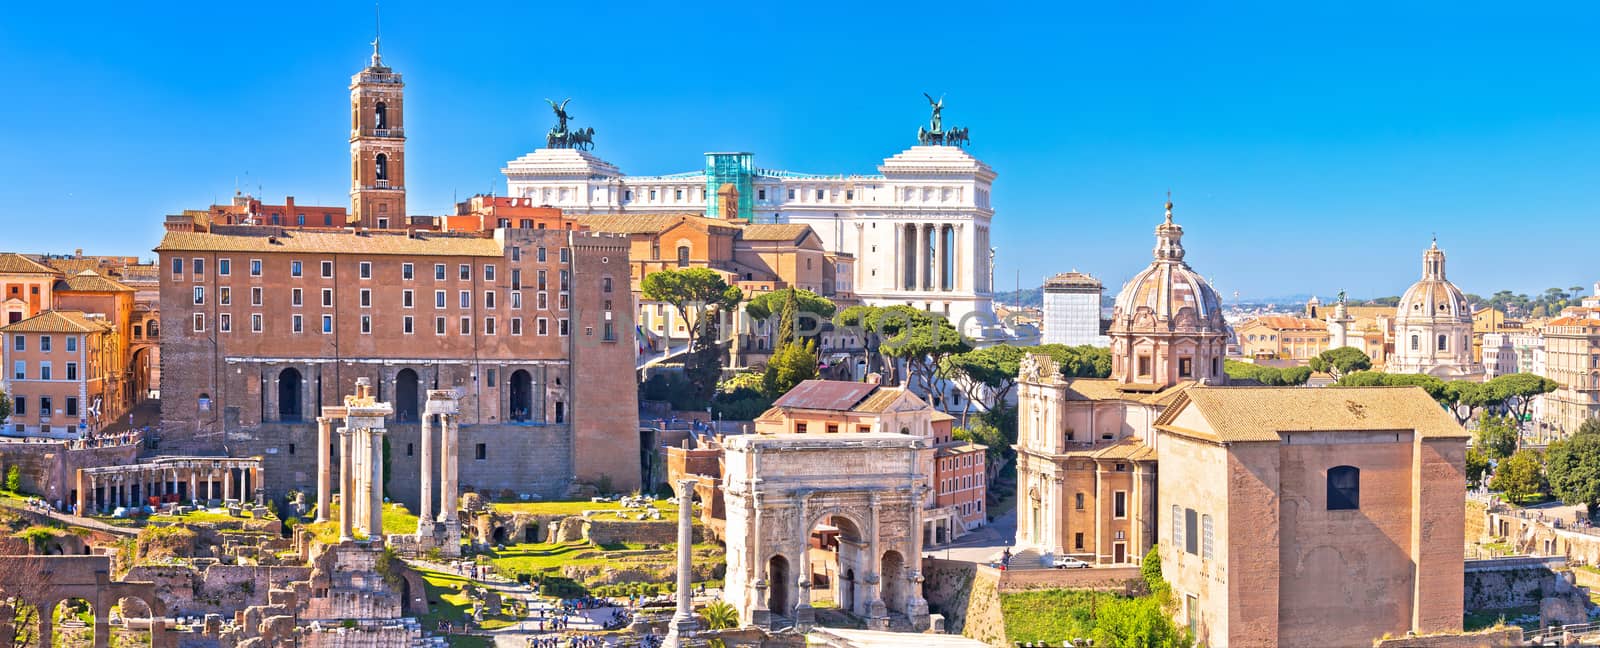 Rome. Scenic aerial view over the ruins of the Roman Forum and landmarks of Rome, capital of Italy
